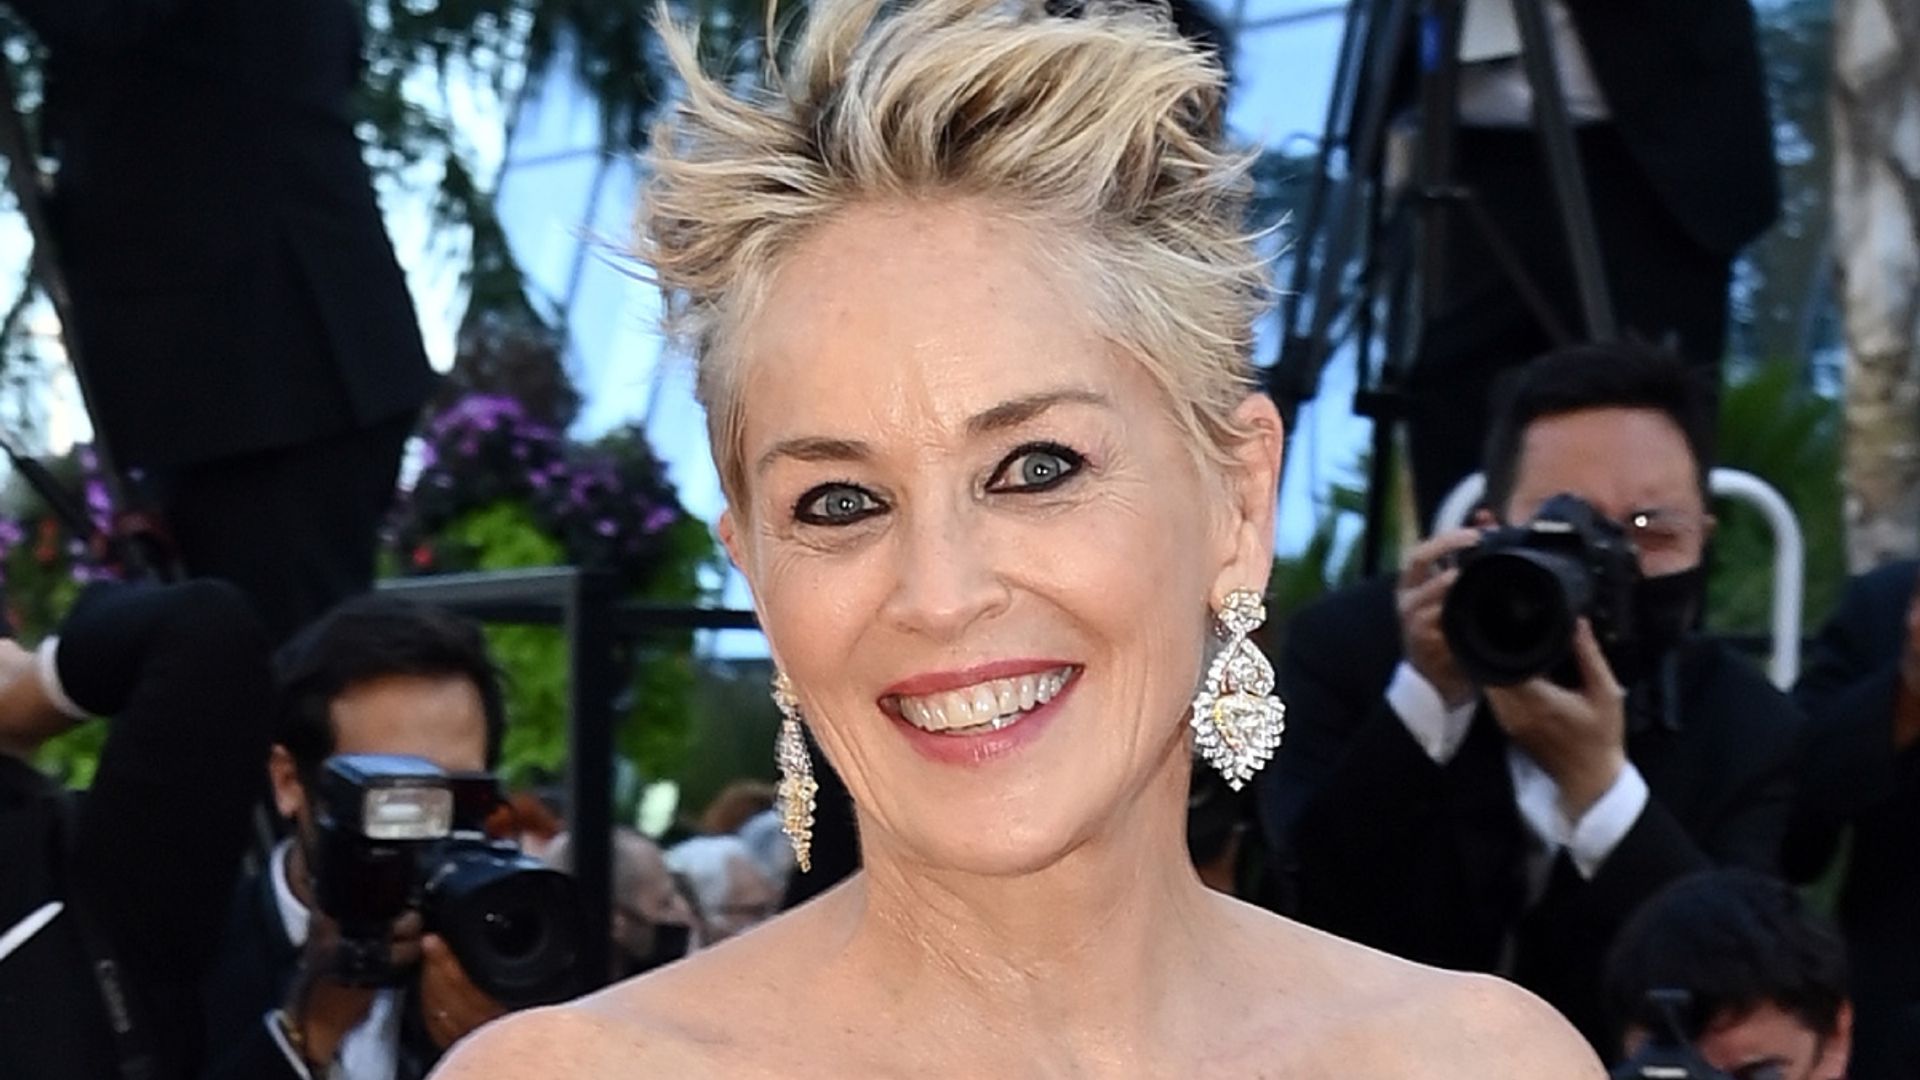 Sharon Stone debuts big transformation for exciting career move